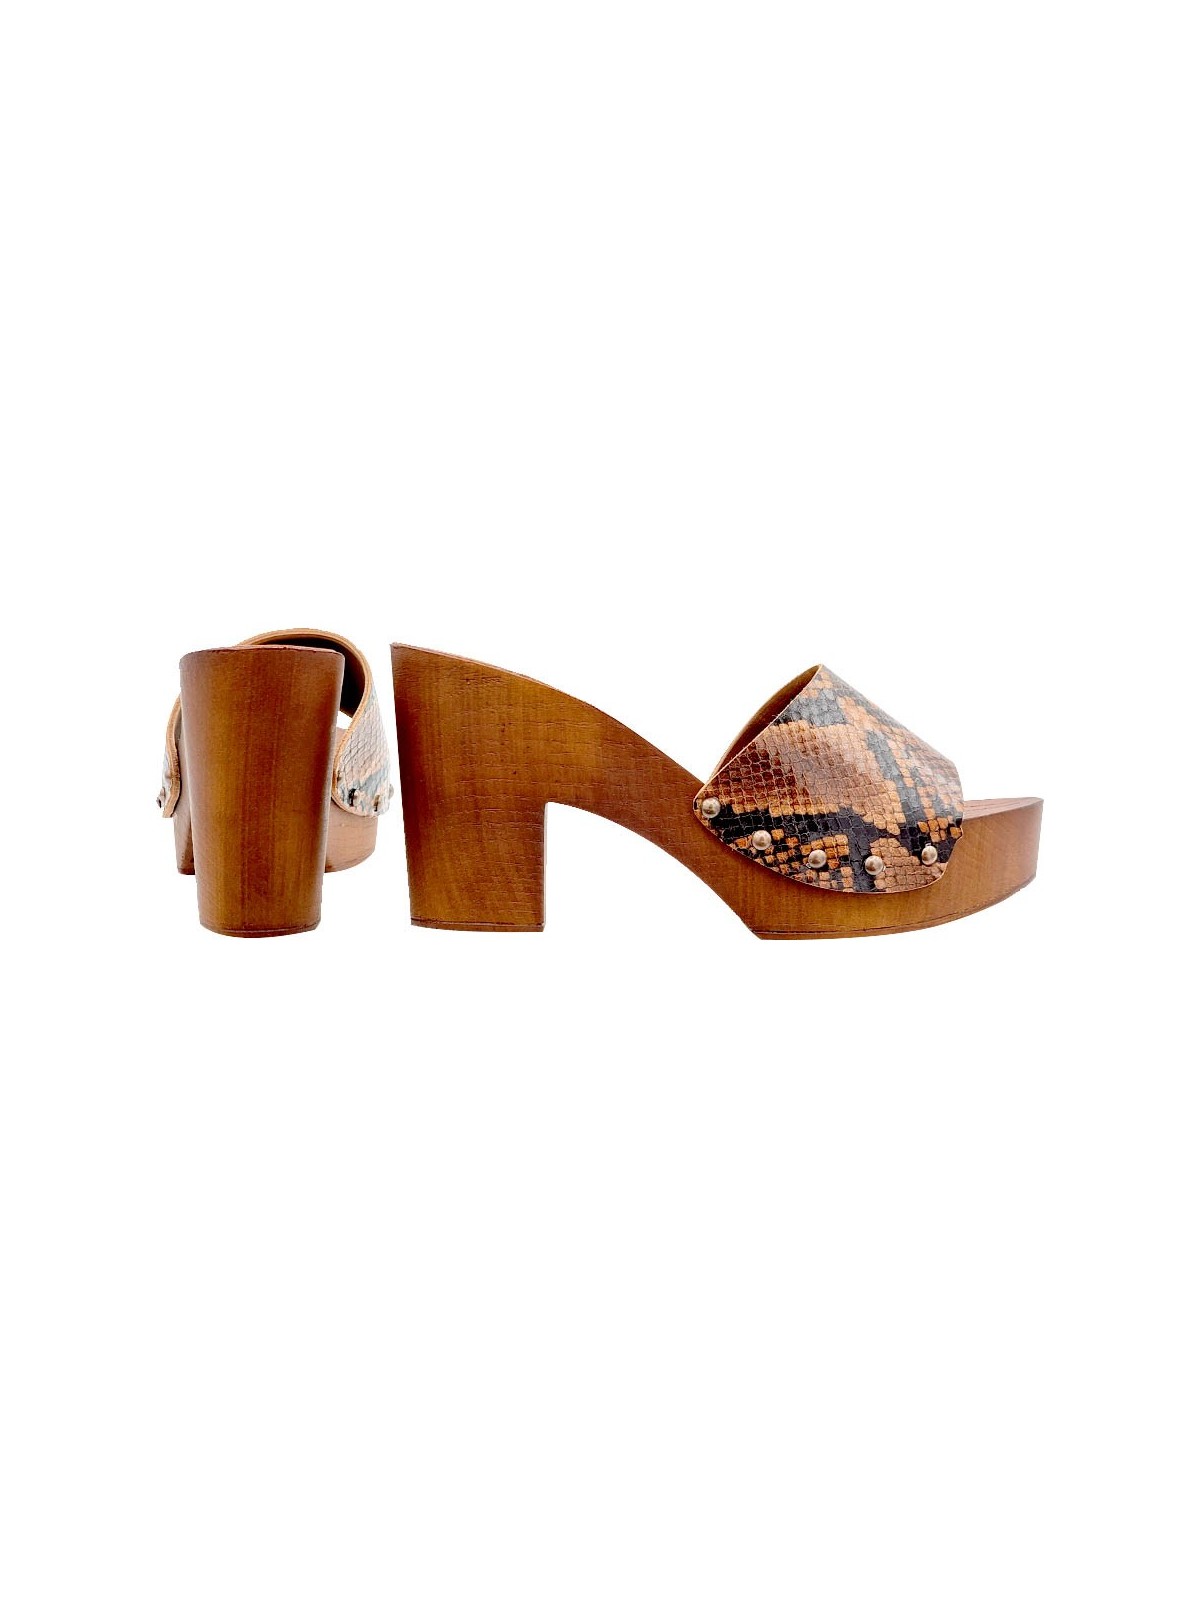 CLOGS WITH PYTHON "EFFECT" BROWN BAND